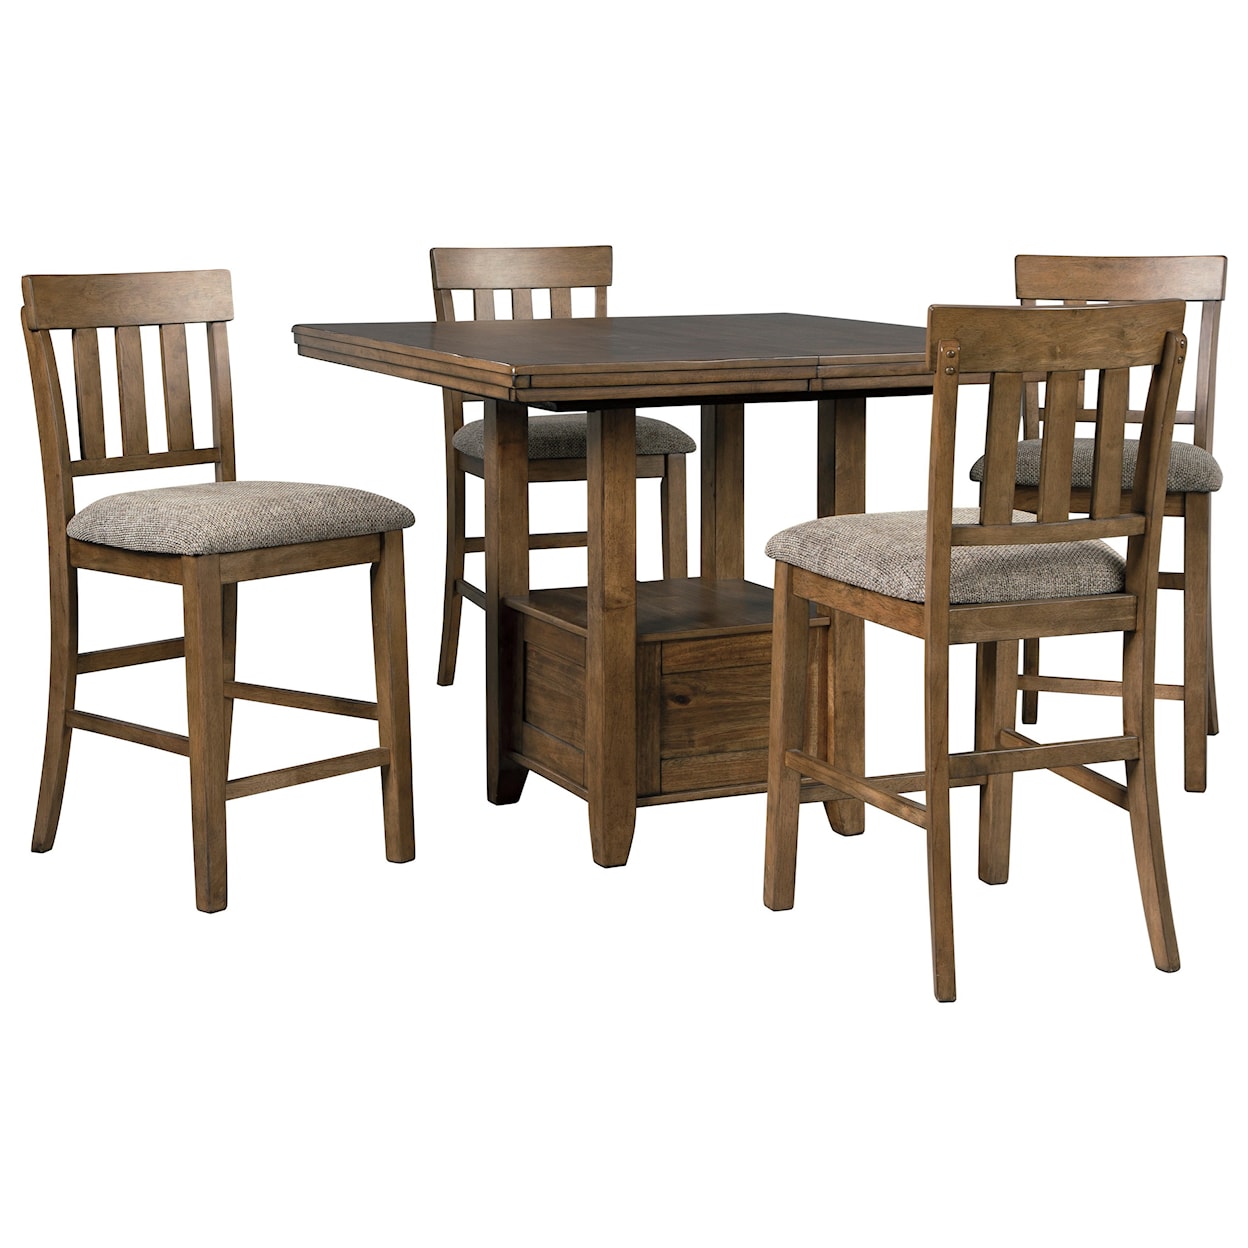 Benchcraft Flaybern 5-Piece Counter Table Set